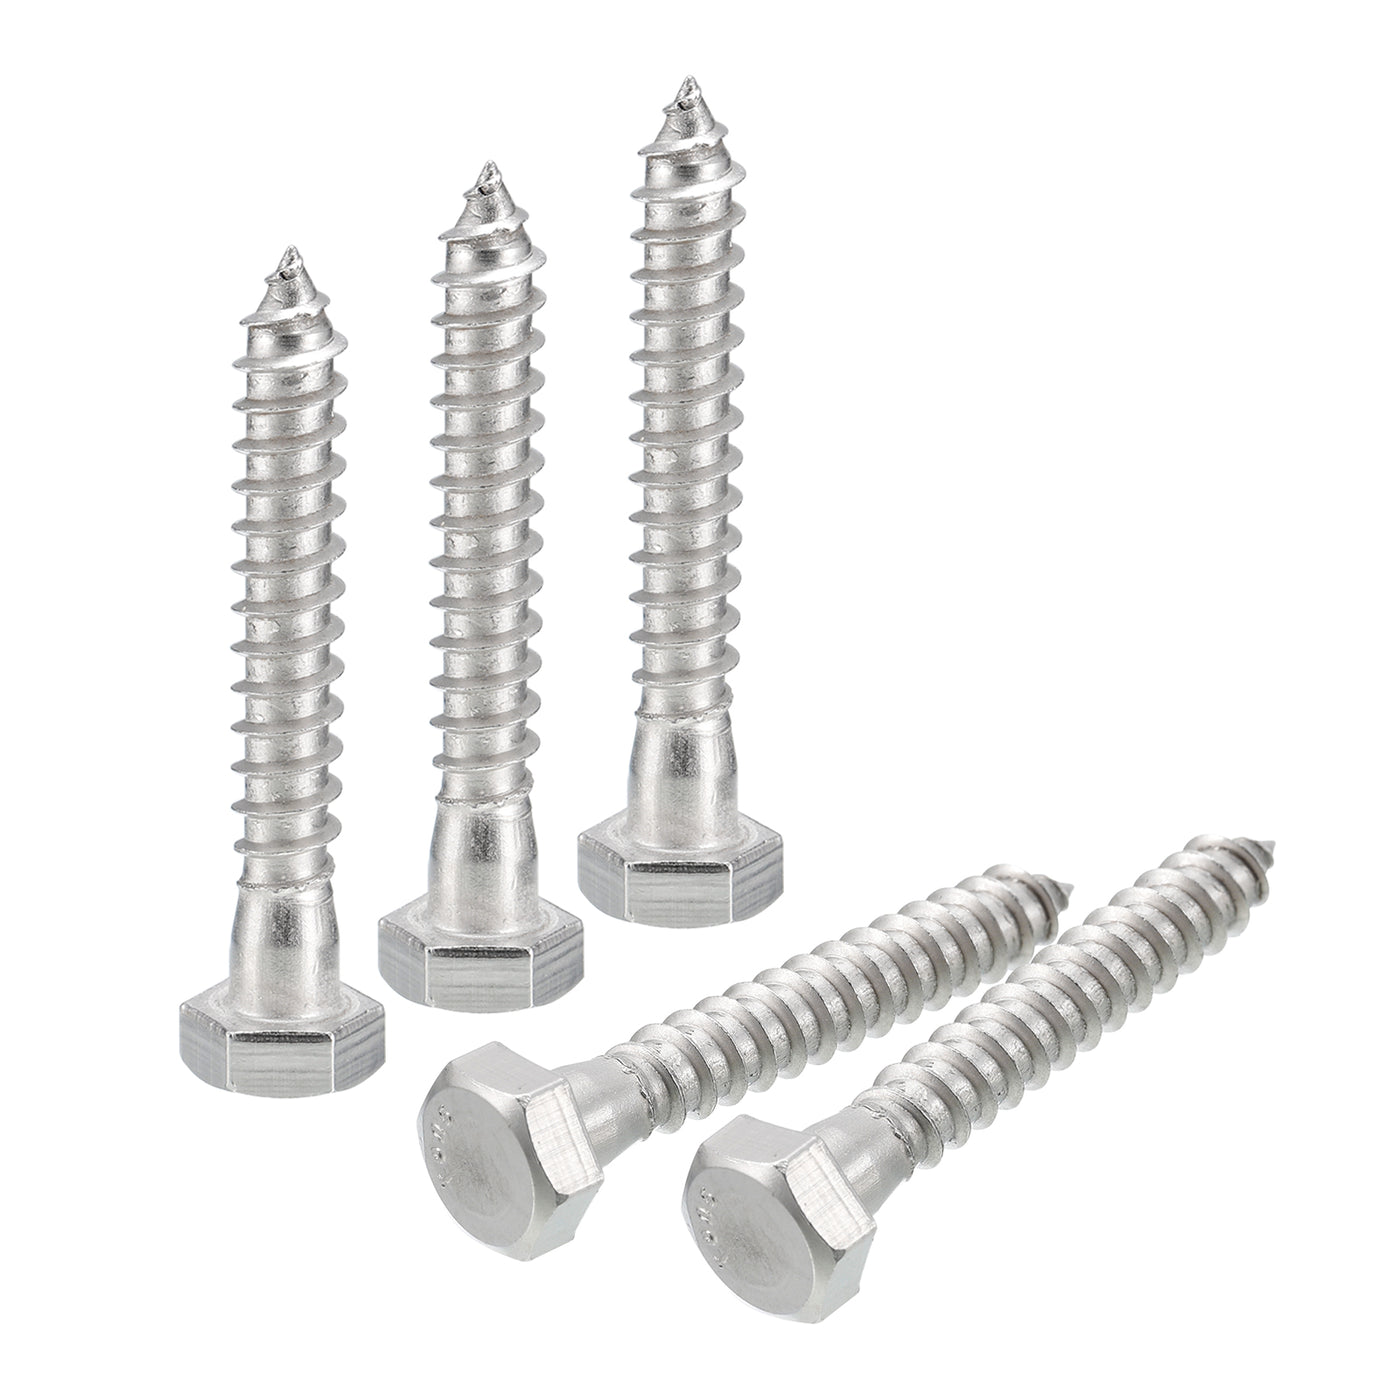 uxcell Uxcell Hex Head Lag Screws Bolts, 5pcs 5/16" x 2" 304 Stainless Steel Wood Screws